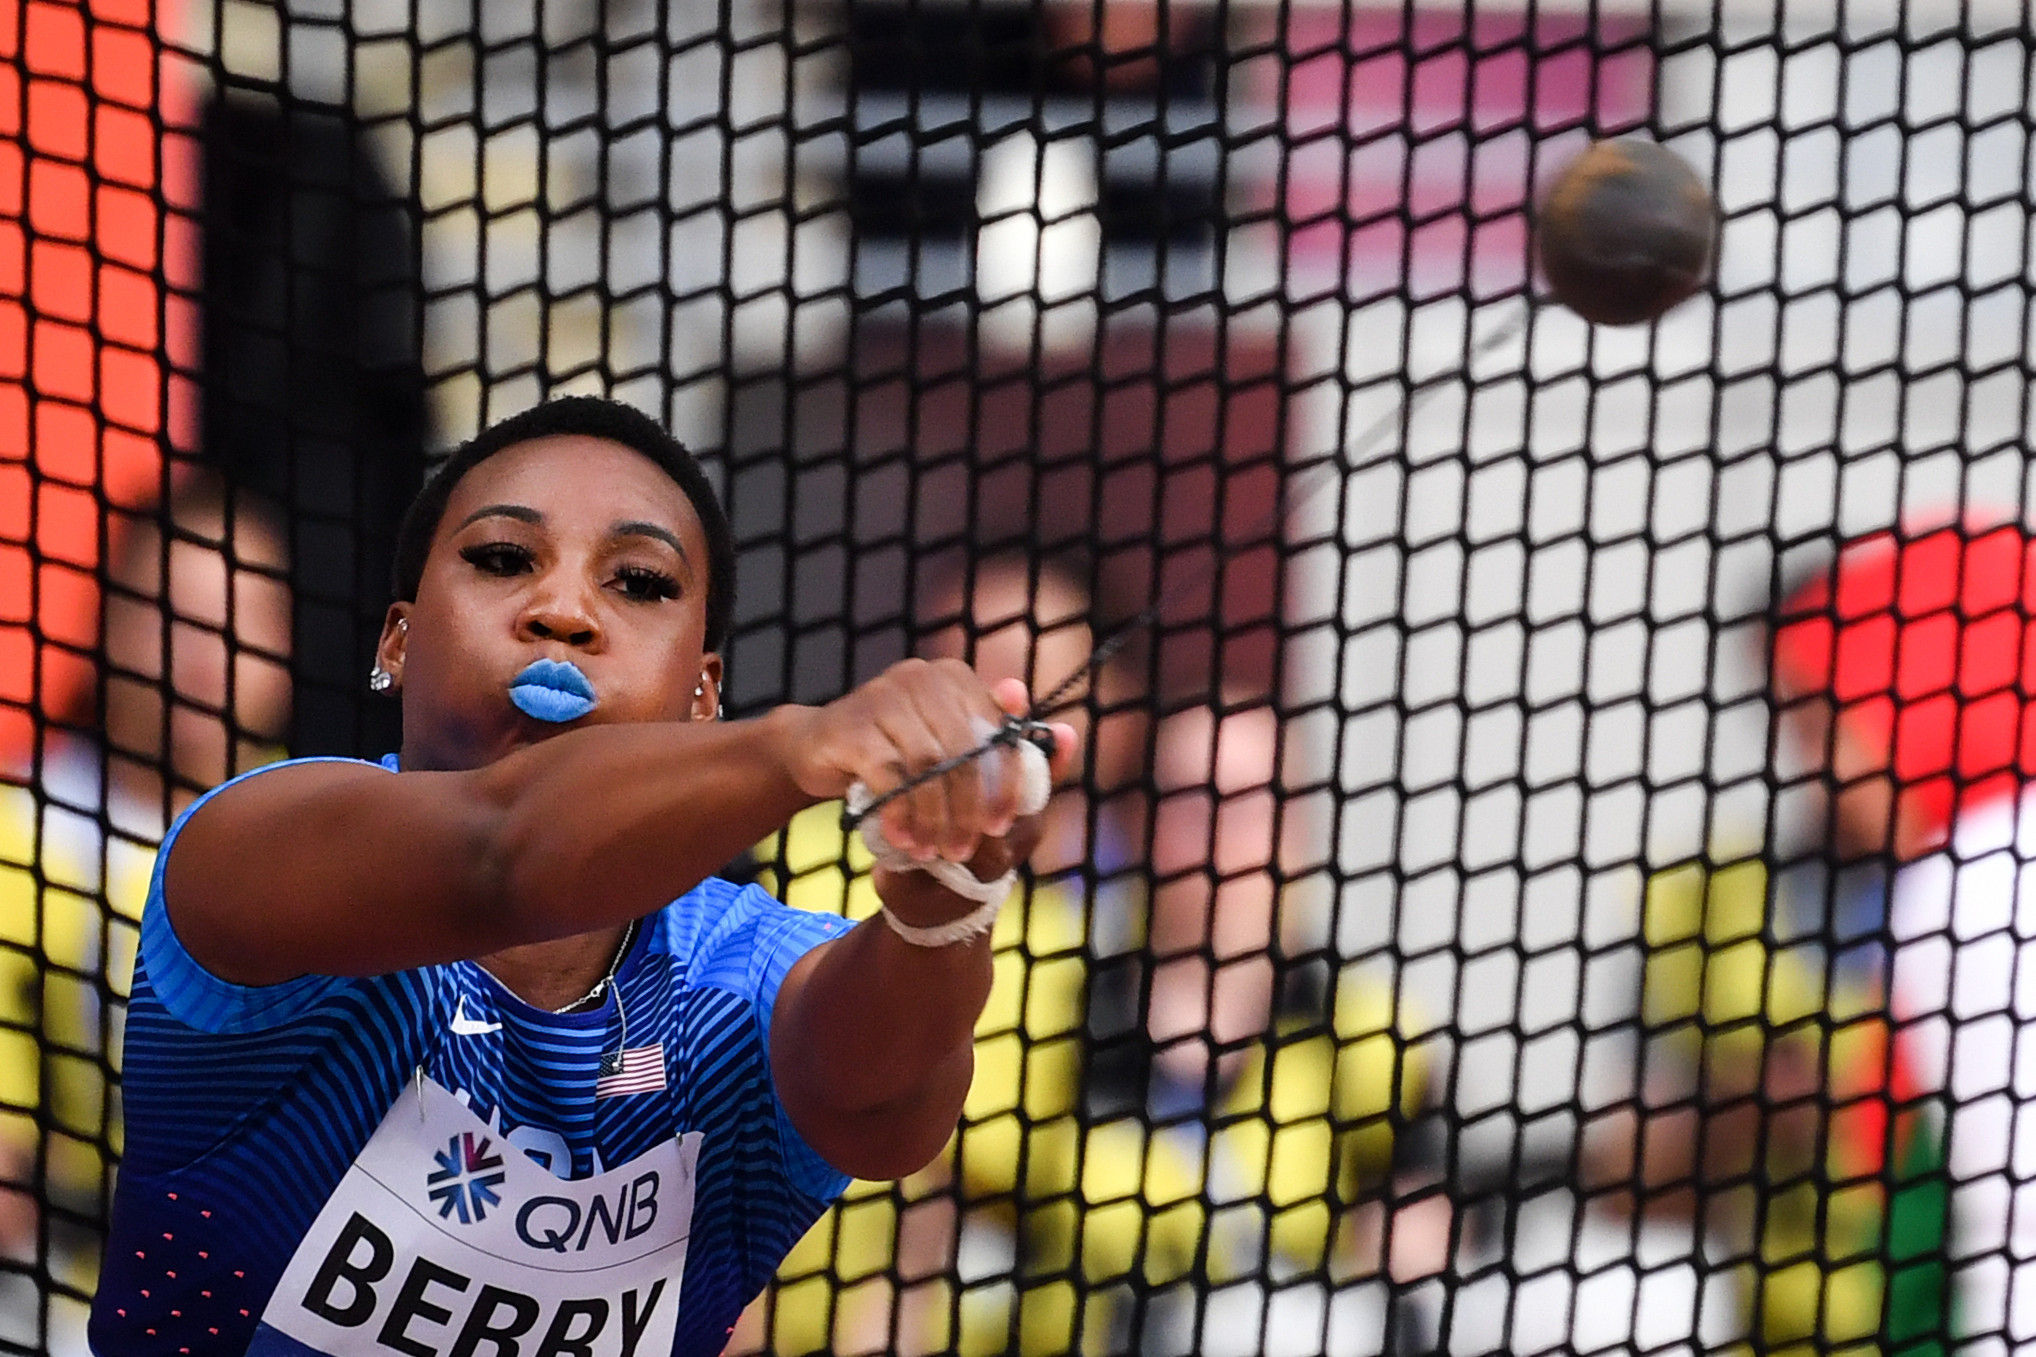 Hammer thrower Gwen Berry has called for the IOC to remove Rule 50 ©Getty Images